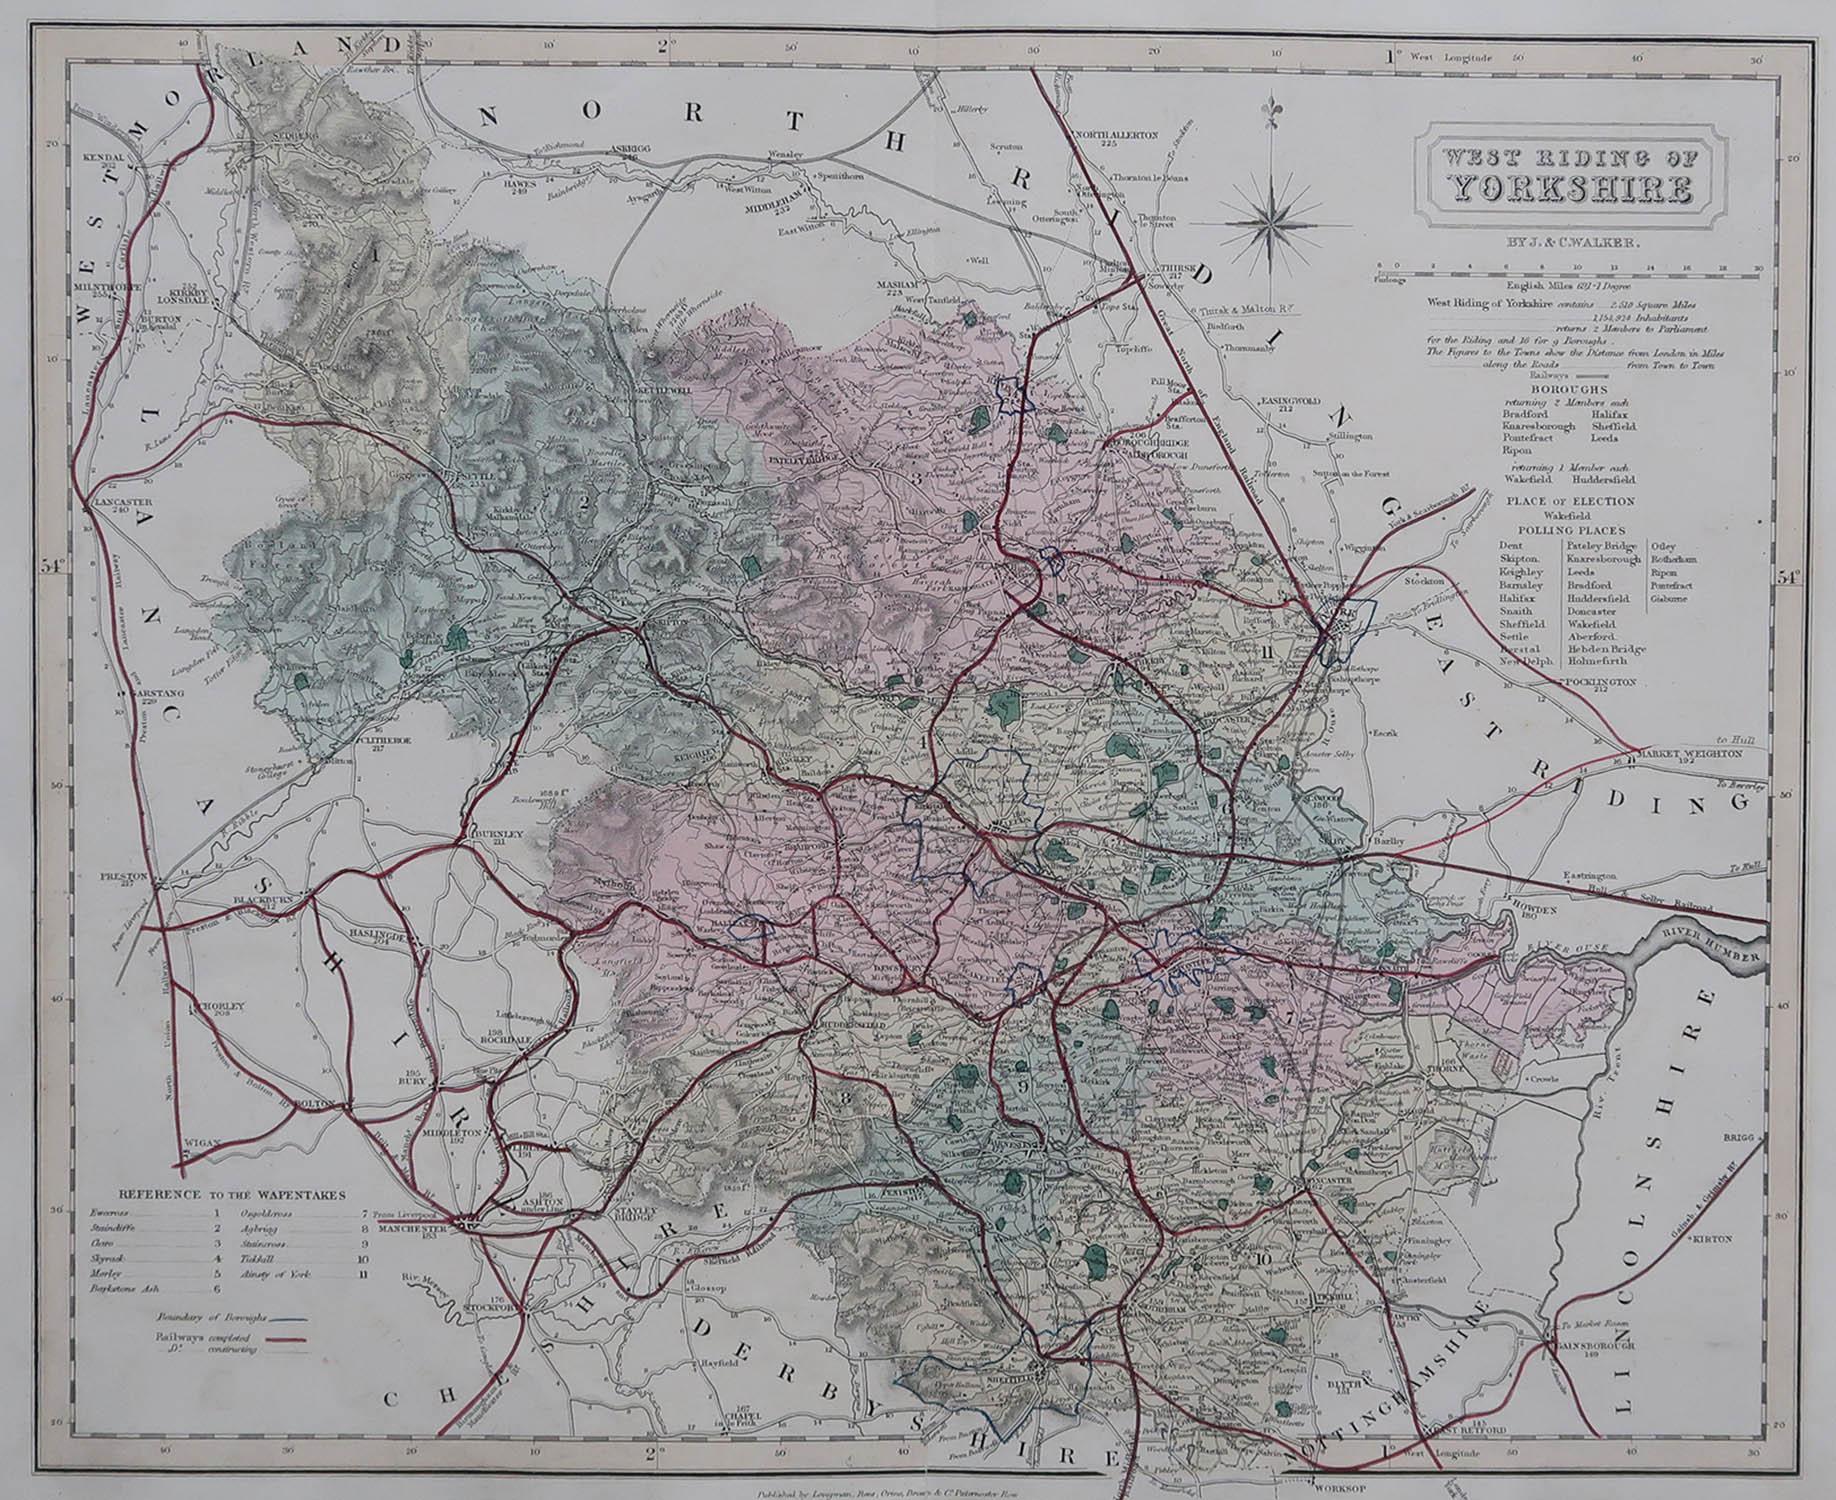 Great map of The West Riding of Yorkshire

Original colour

By J & C Walker

Published by Longman, Rees, Orme, Brown & Co. 1851

Unframed.




